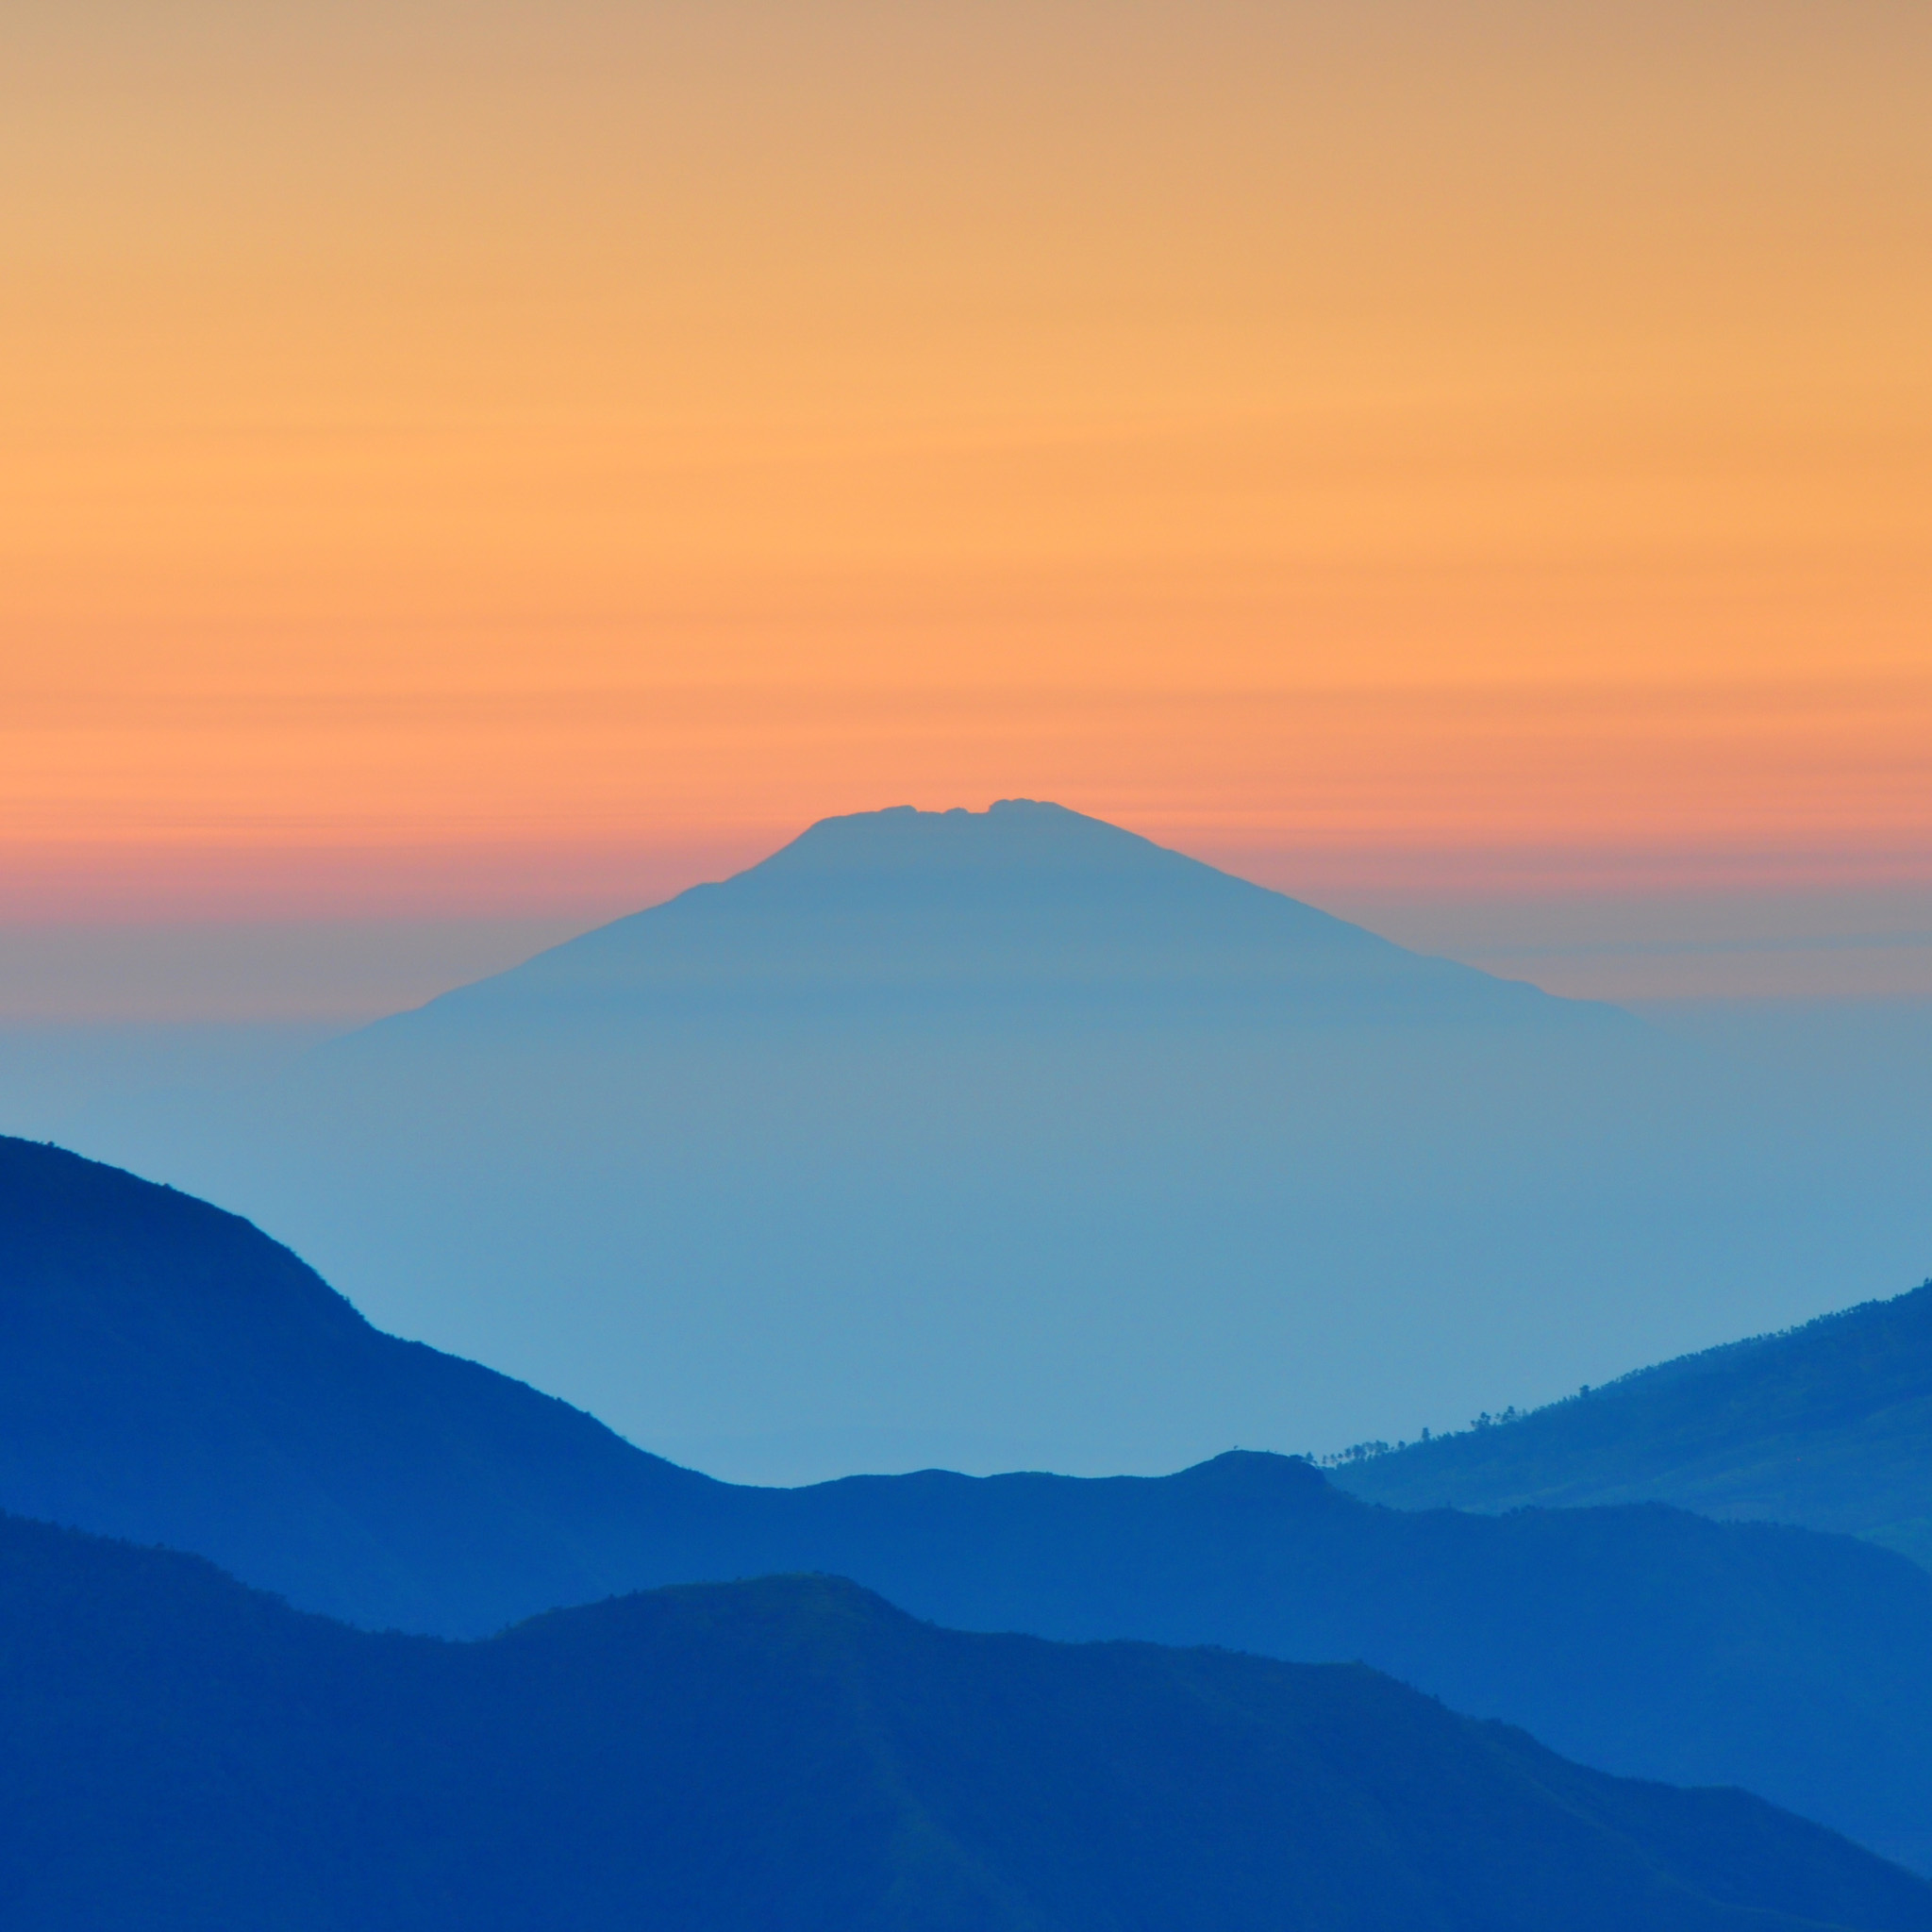 Orange And Blue Mountains - HD Wallpaper 